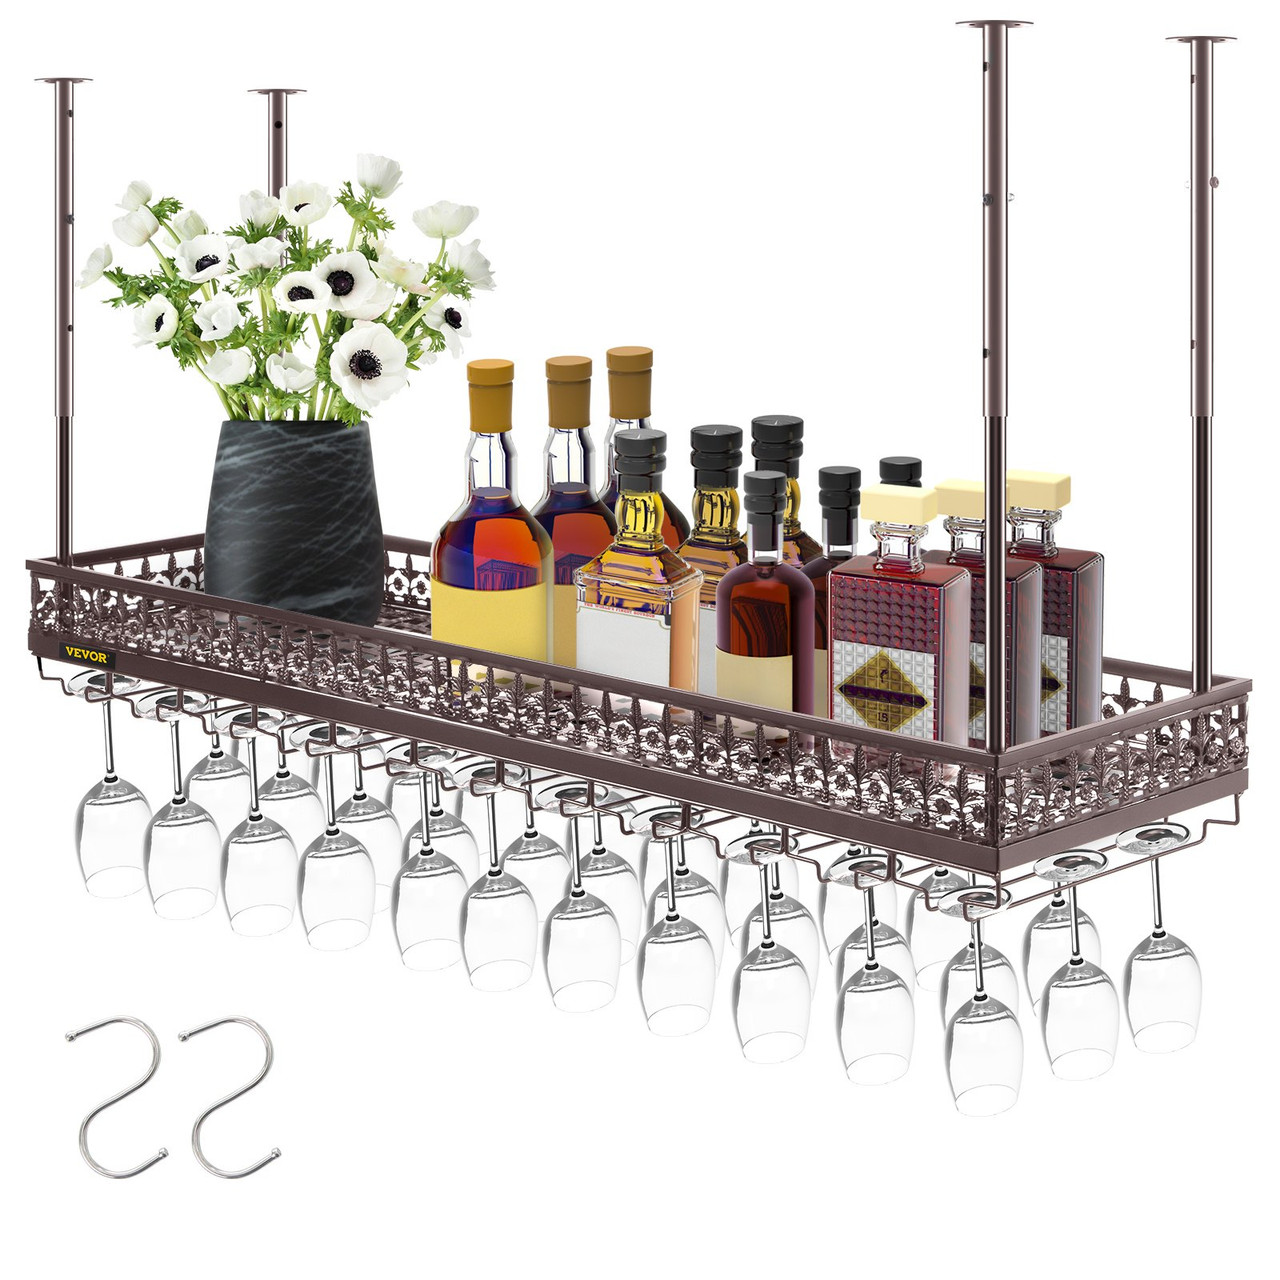 Ceiling Wine Glass Rack, 46.9 x 13 inch Hanging Wine Glass Rack, 18.9-35.8 inch Height Adjustable Hanging Wine Rack Cabinet, Coppery Wall-Mounted Wine Glass Rack Perfect for Bar Cafe Kitchen